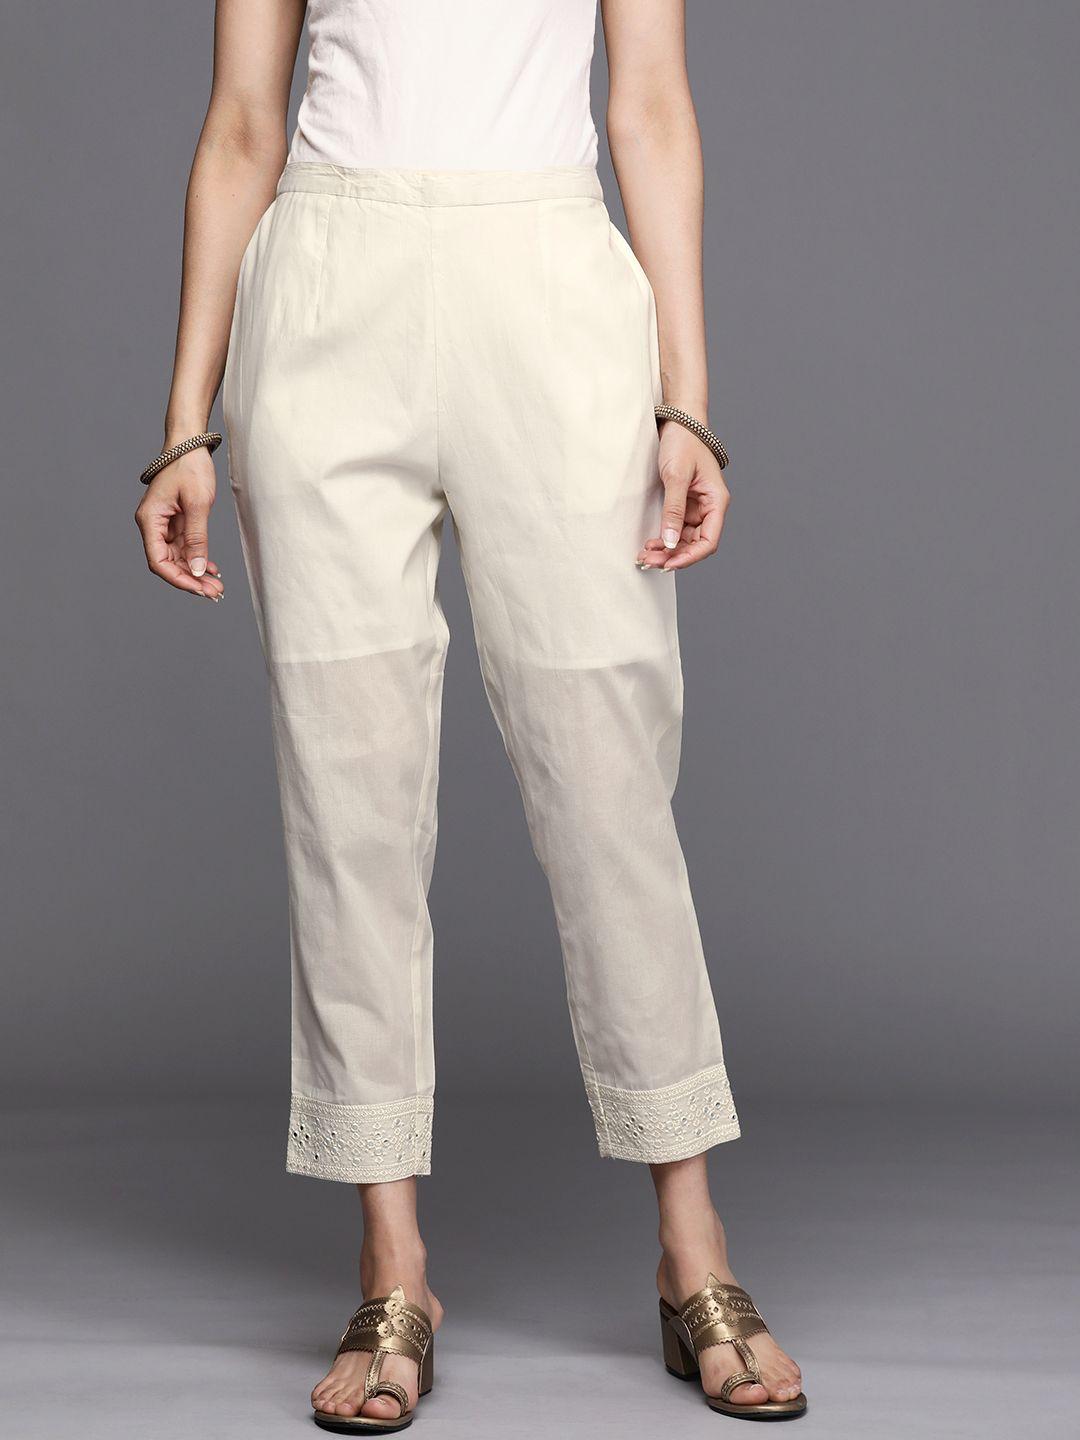 libas-women-off-white-ethnic-motifs-embroidered-pure-cotton-trousers